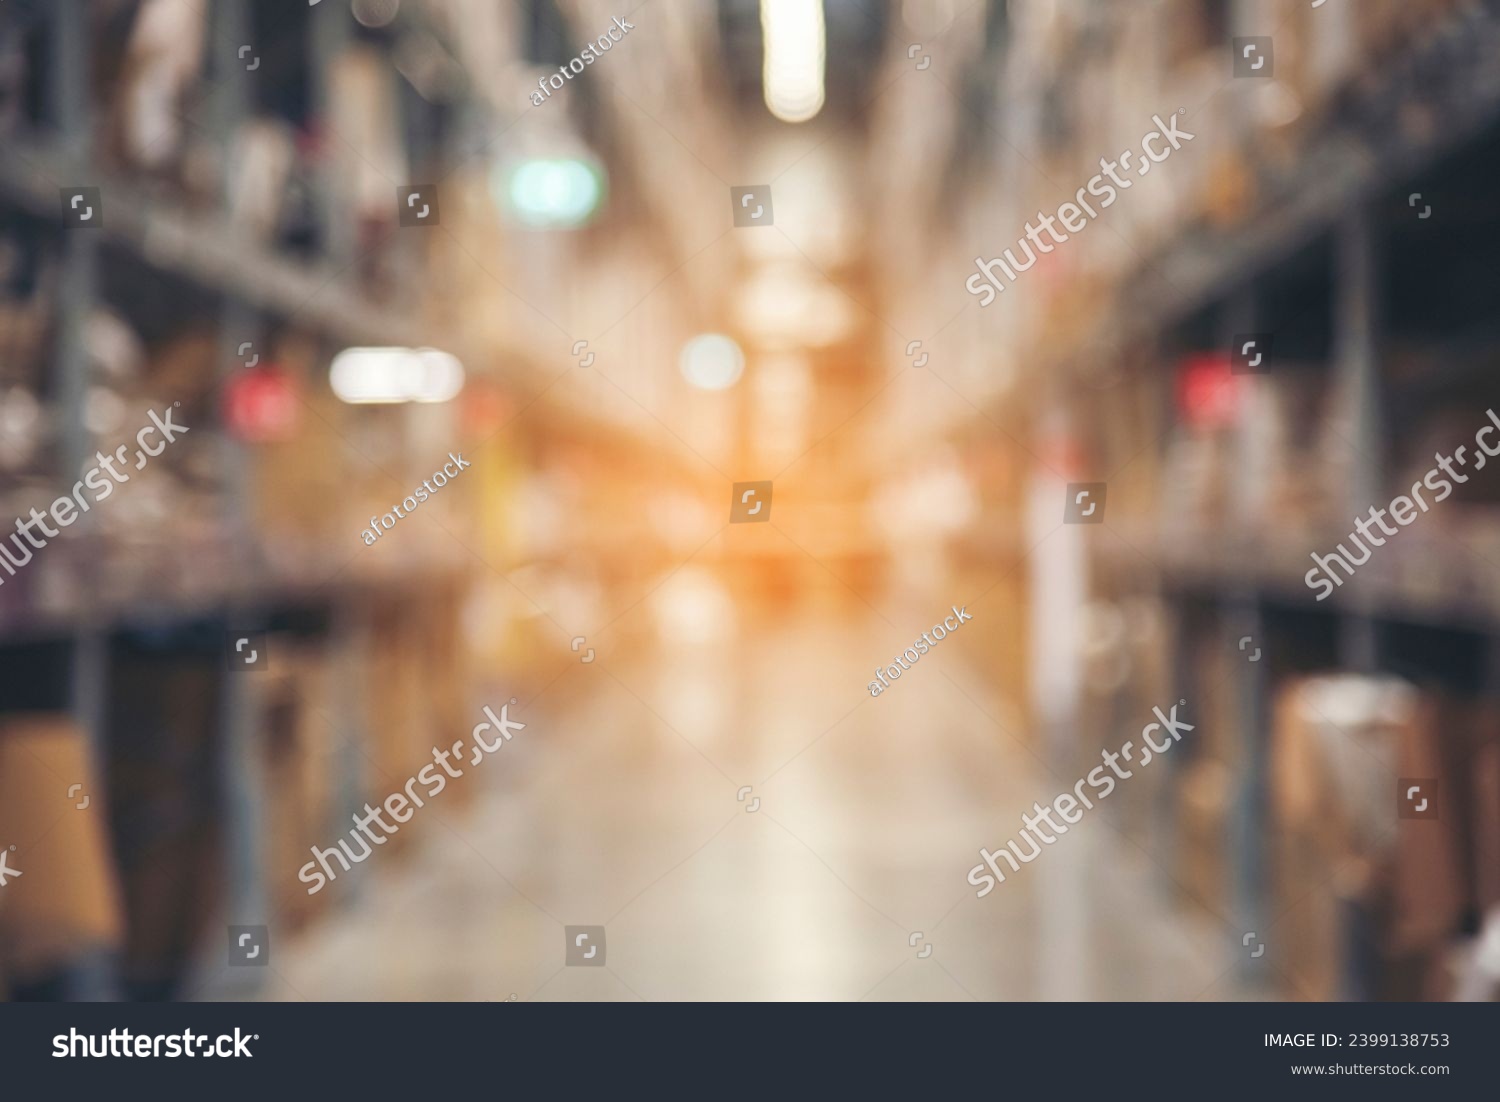 Warehouse background storage inventory shelf with freight container aisle space. Goods supply lot shelf cardboard store box pallet. Commercial packaging on steel rack. Aisle in storehouse inventory #2399138753